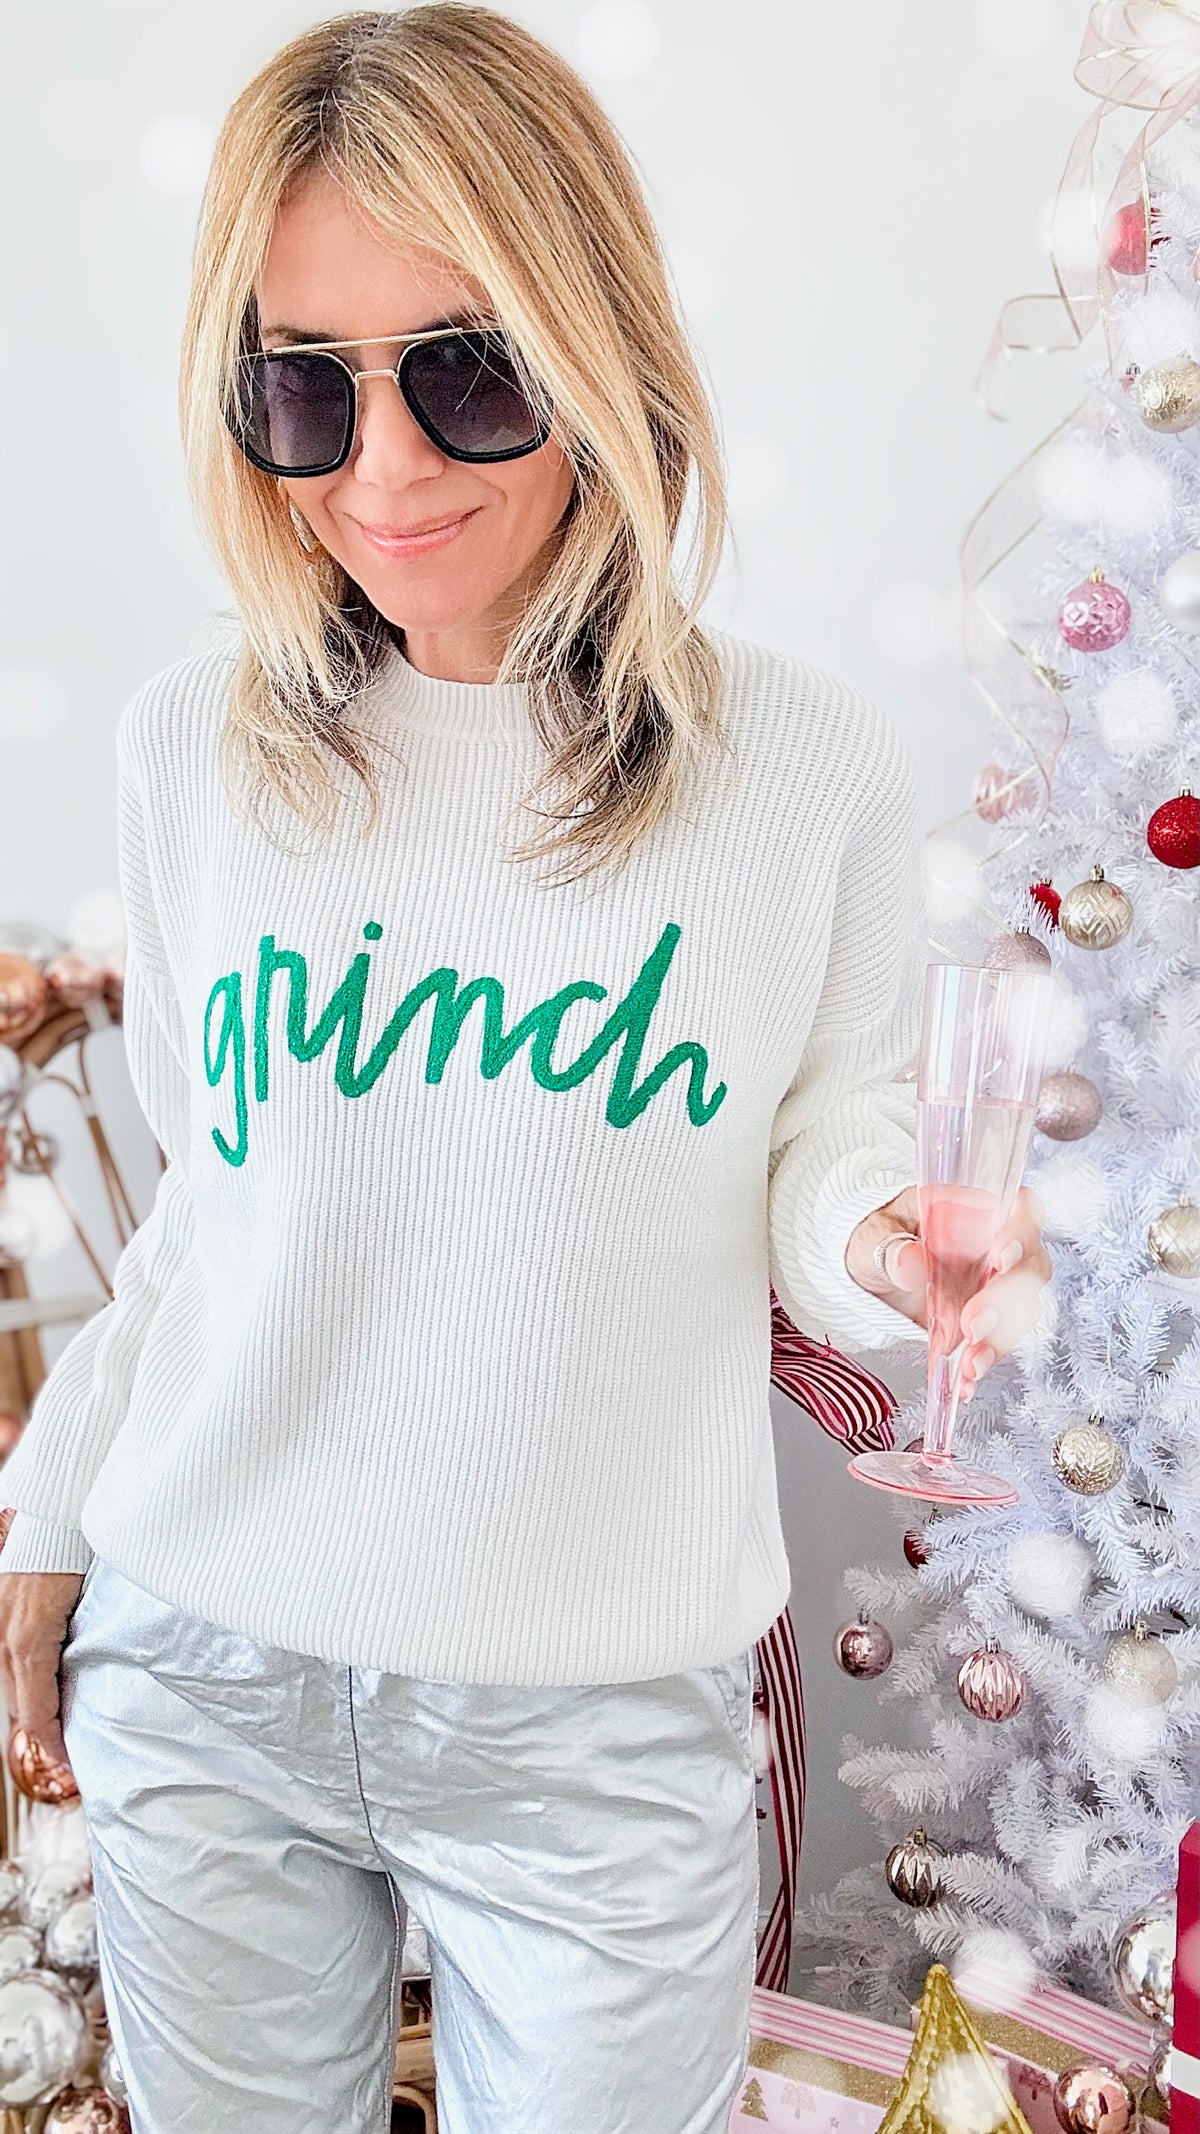 Merry Grinch-mas Letter Sweater-140 Sweaters-WHY DRESS-Coastal Bloom Boutique, find the trendiest versions of the popular styles and looks Located in Indialantic, FL